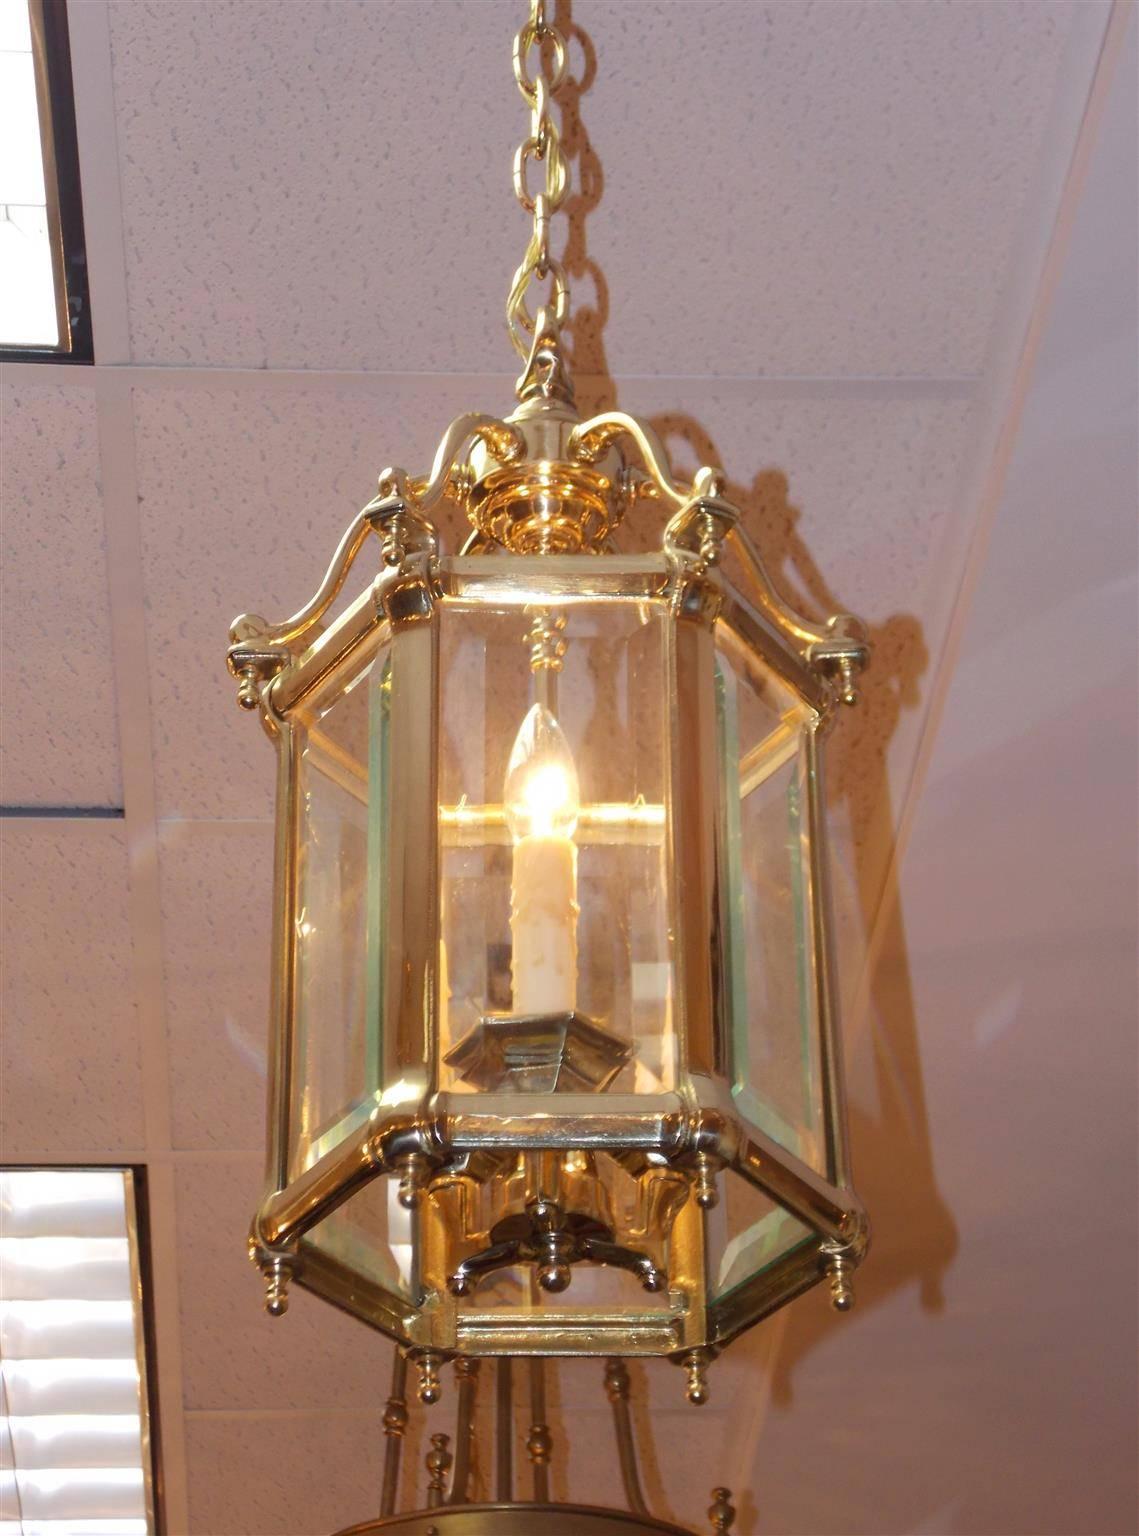 American brass six-sided hall lantern with a centered mounted ring, scrolled arms with corner finials, original beveled glass, three interior light cluster, and resting on a molded edge base with ball finials. Originally candle powered and has been